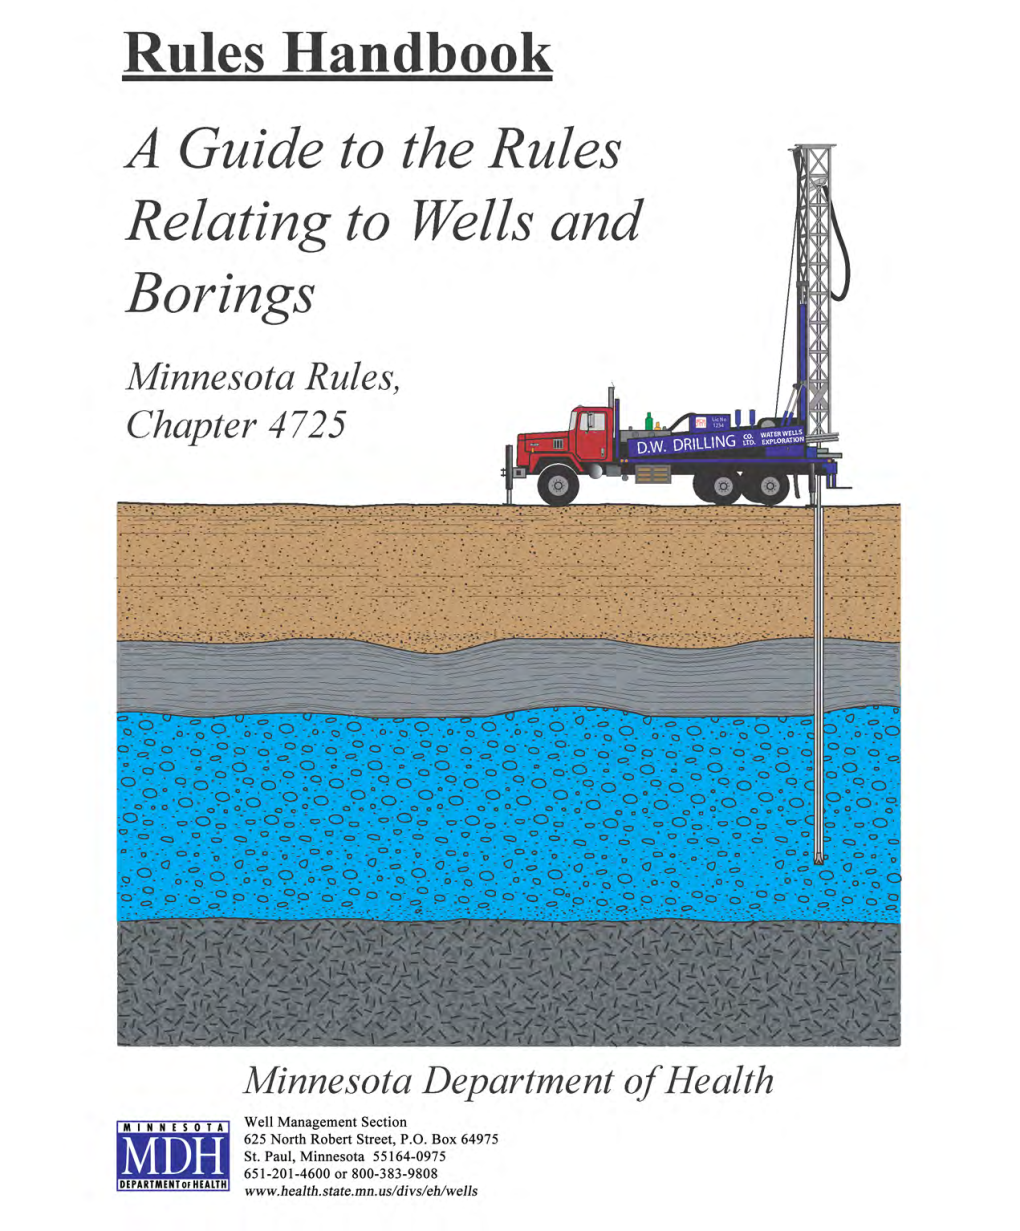 Rules Handbook, a Guide to the Rules Relating to Wells and Borings, Or by Contacting the Well Management Section, Minnesota Department of Health (MDH)